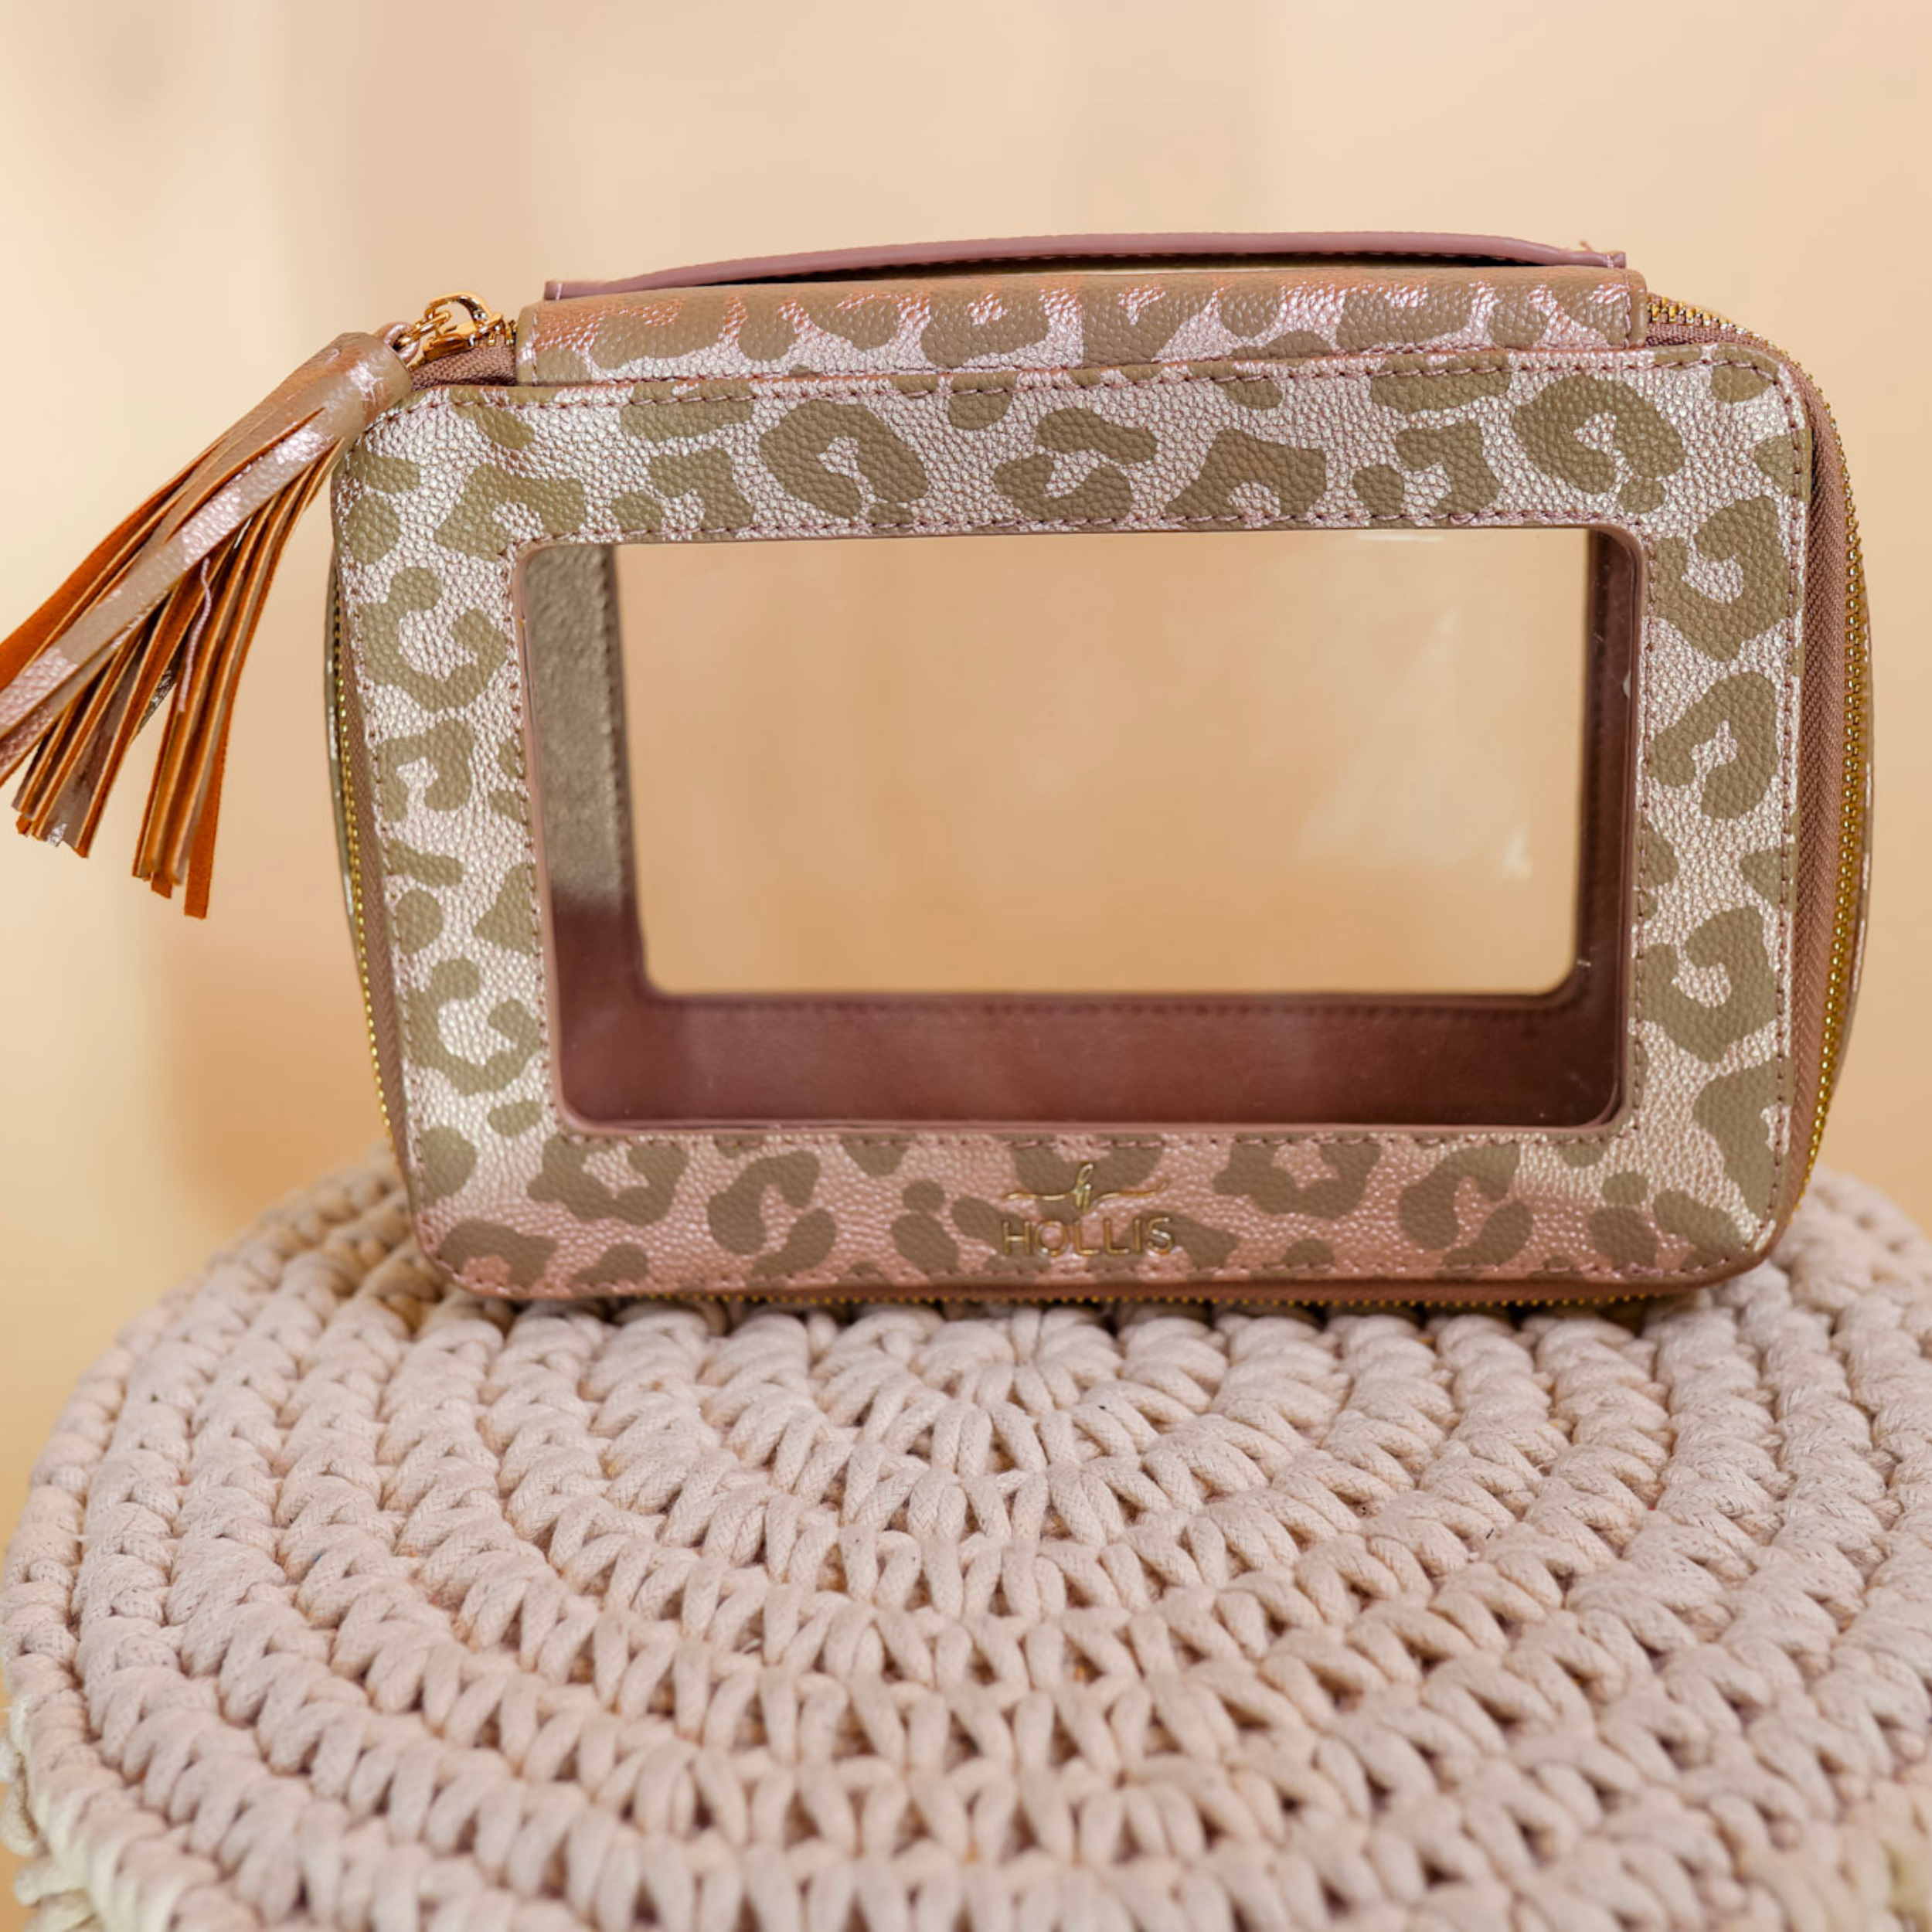 Hollis | Clear Toiletry Bag in Leopard